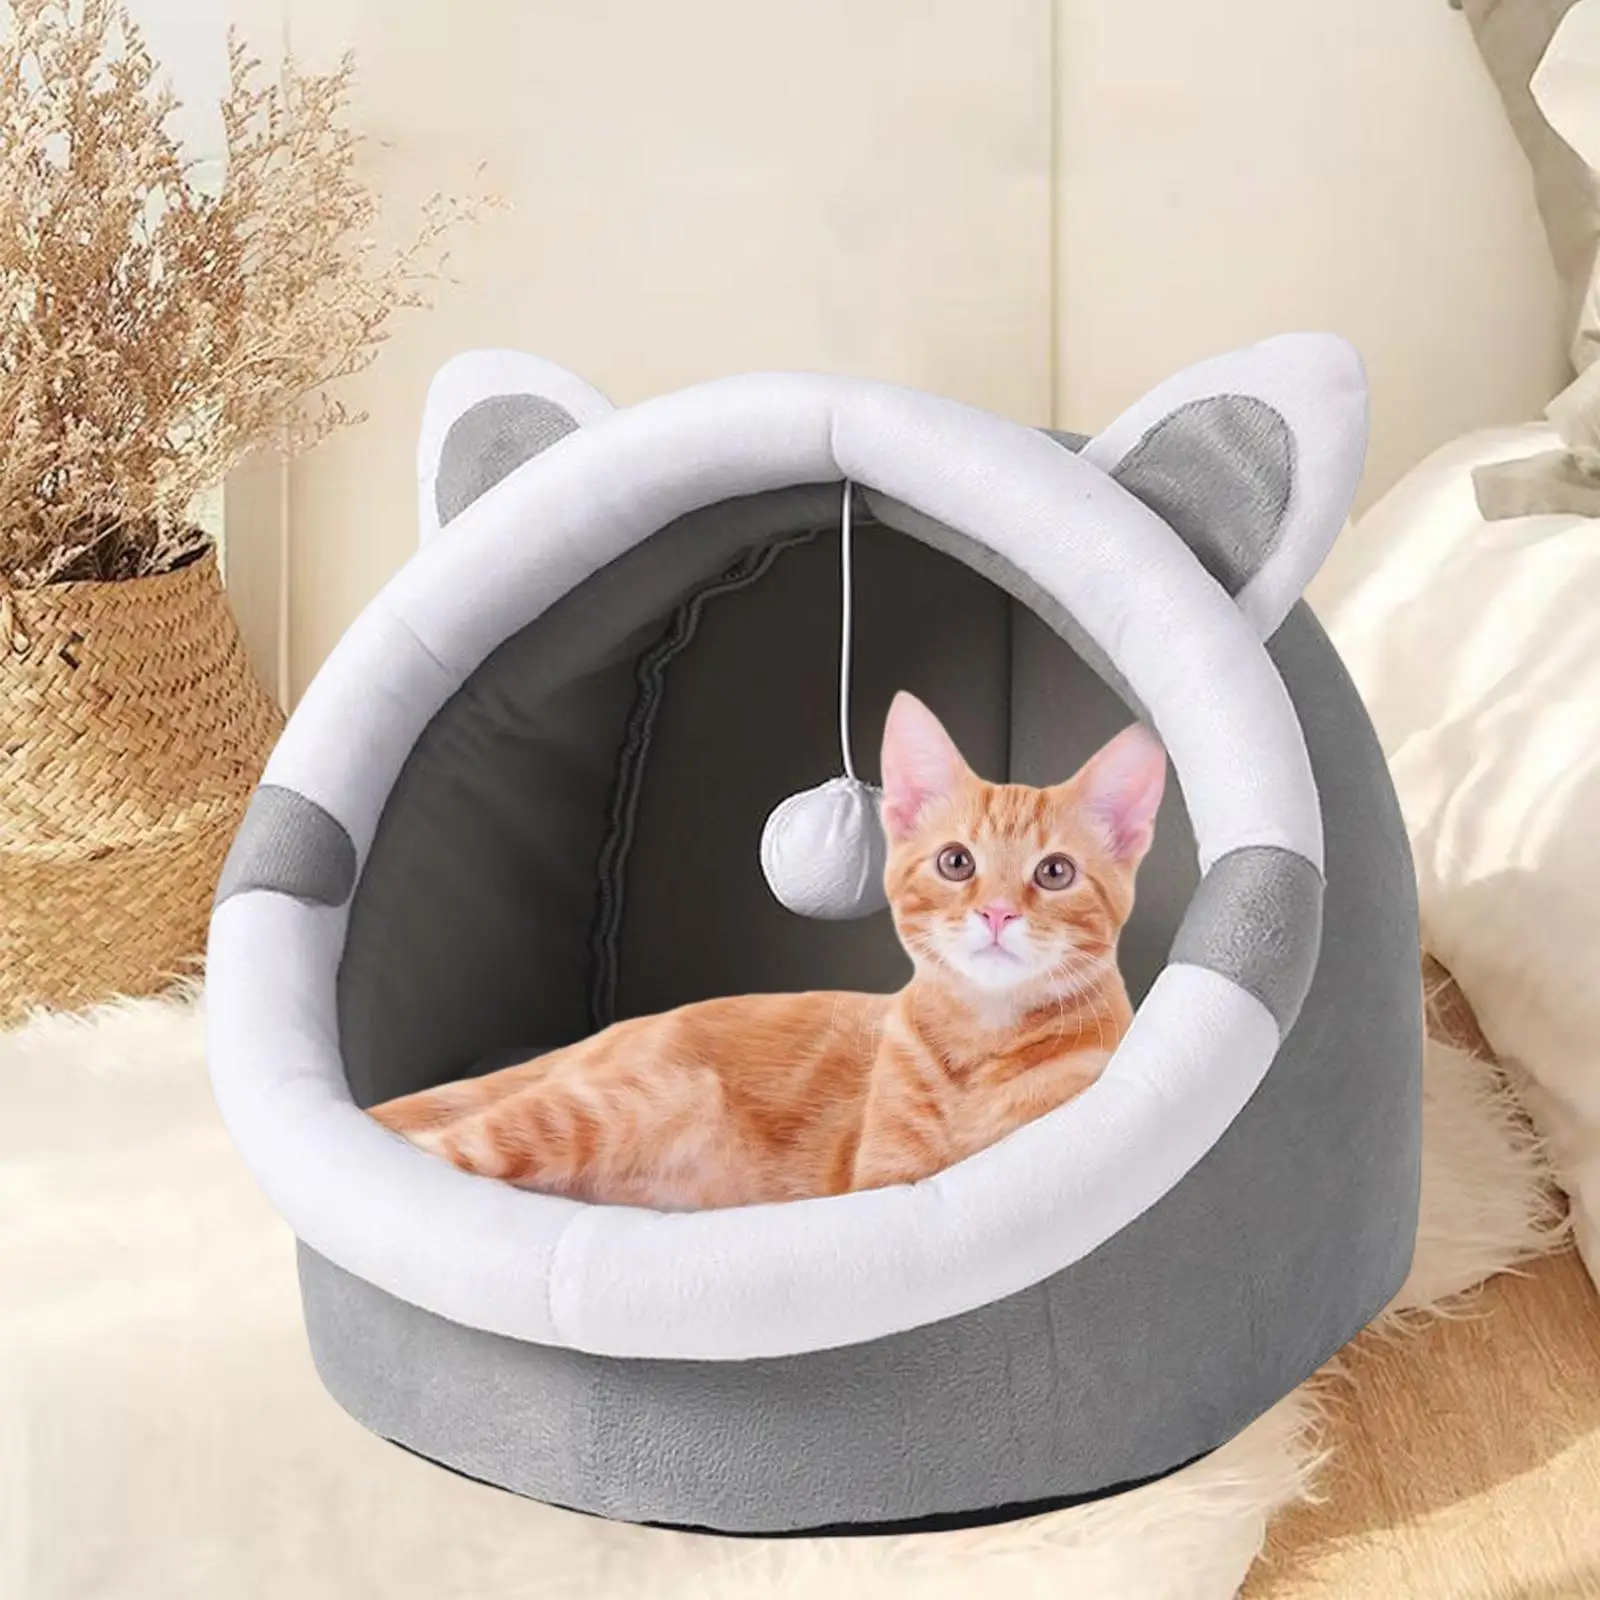 Soft Plush Cat Beds for Indoor Cats with Hanging Toy Anti Slip Bottom Comfortable Warm Nest Pet Tent Small Dog Bed Pet Supplies